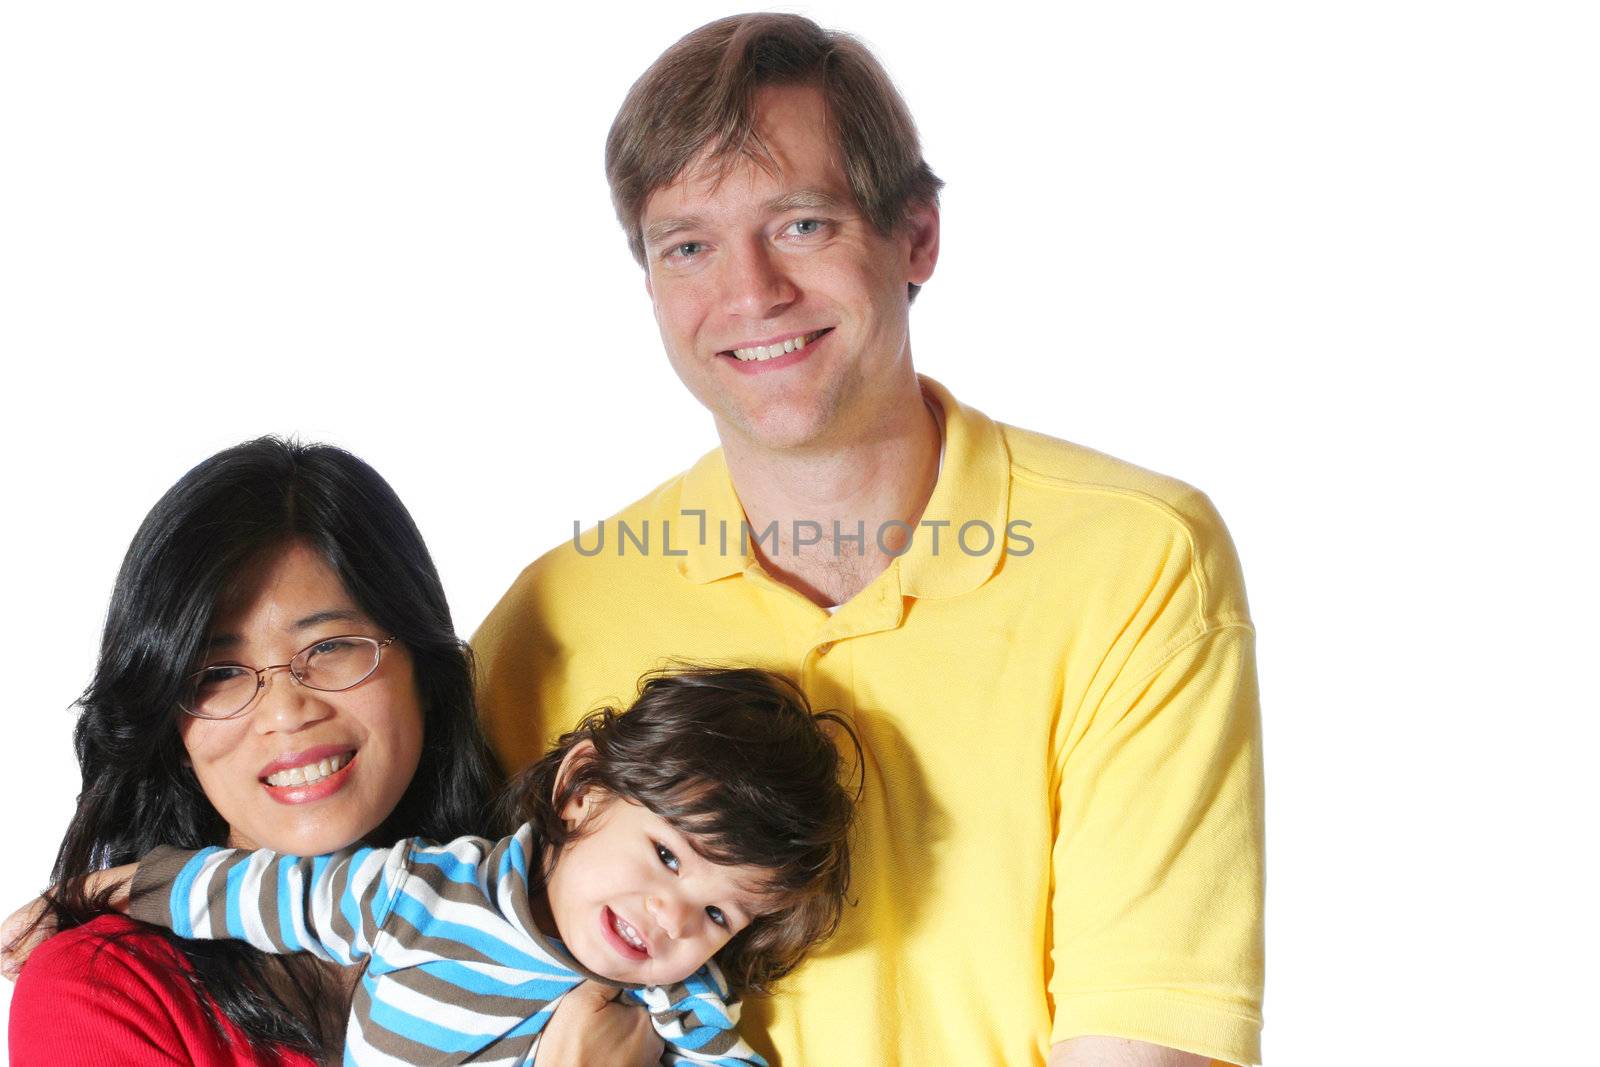 Multiracial family by jarenwicklund